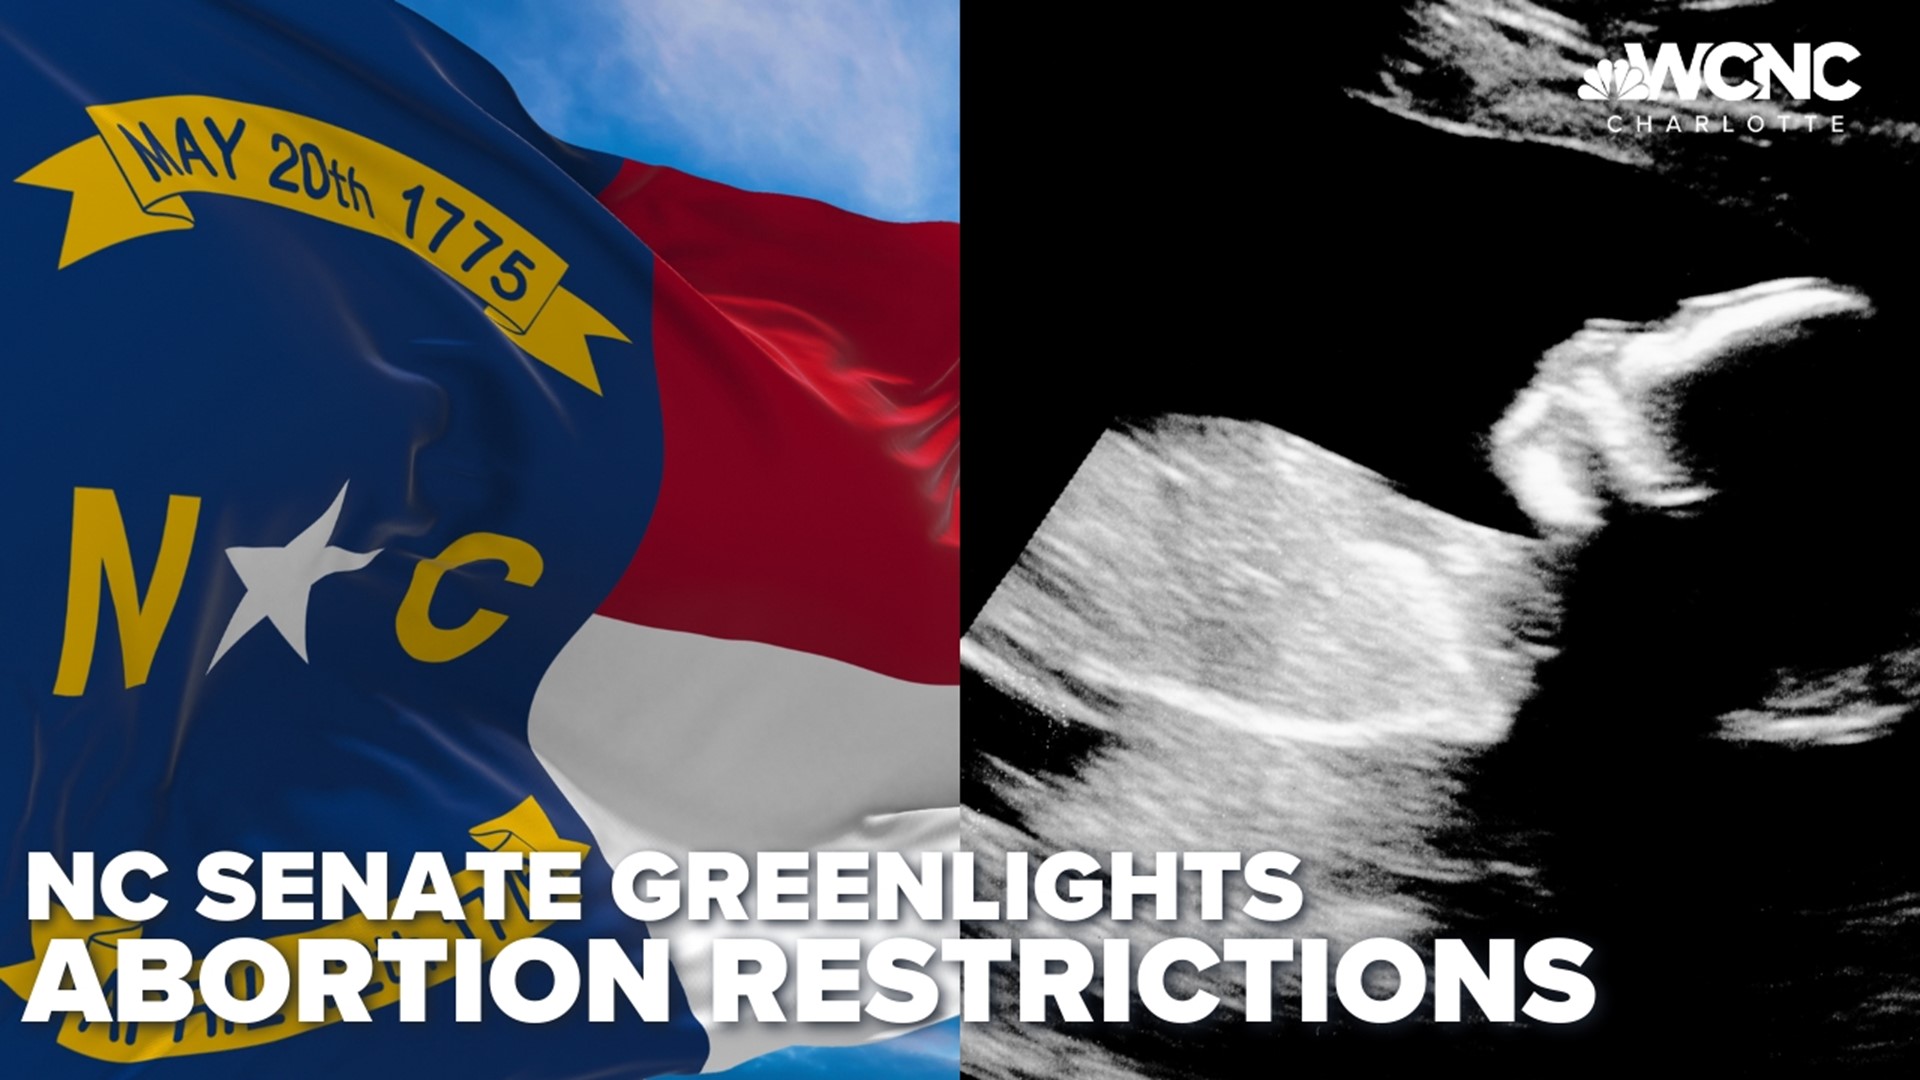 A 12-week abortion ban is one step closer to becoming a reality in North Carolina.